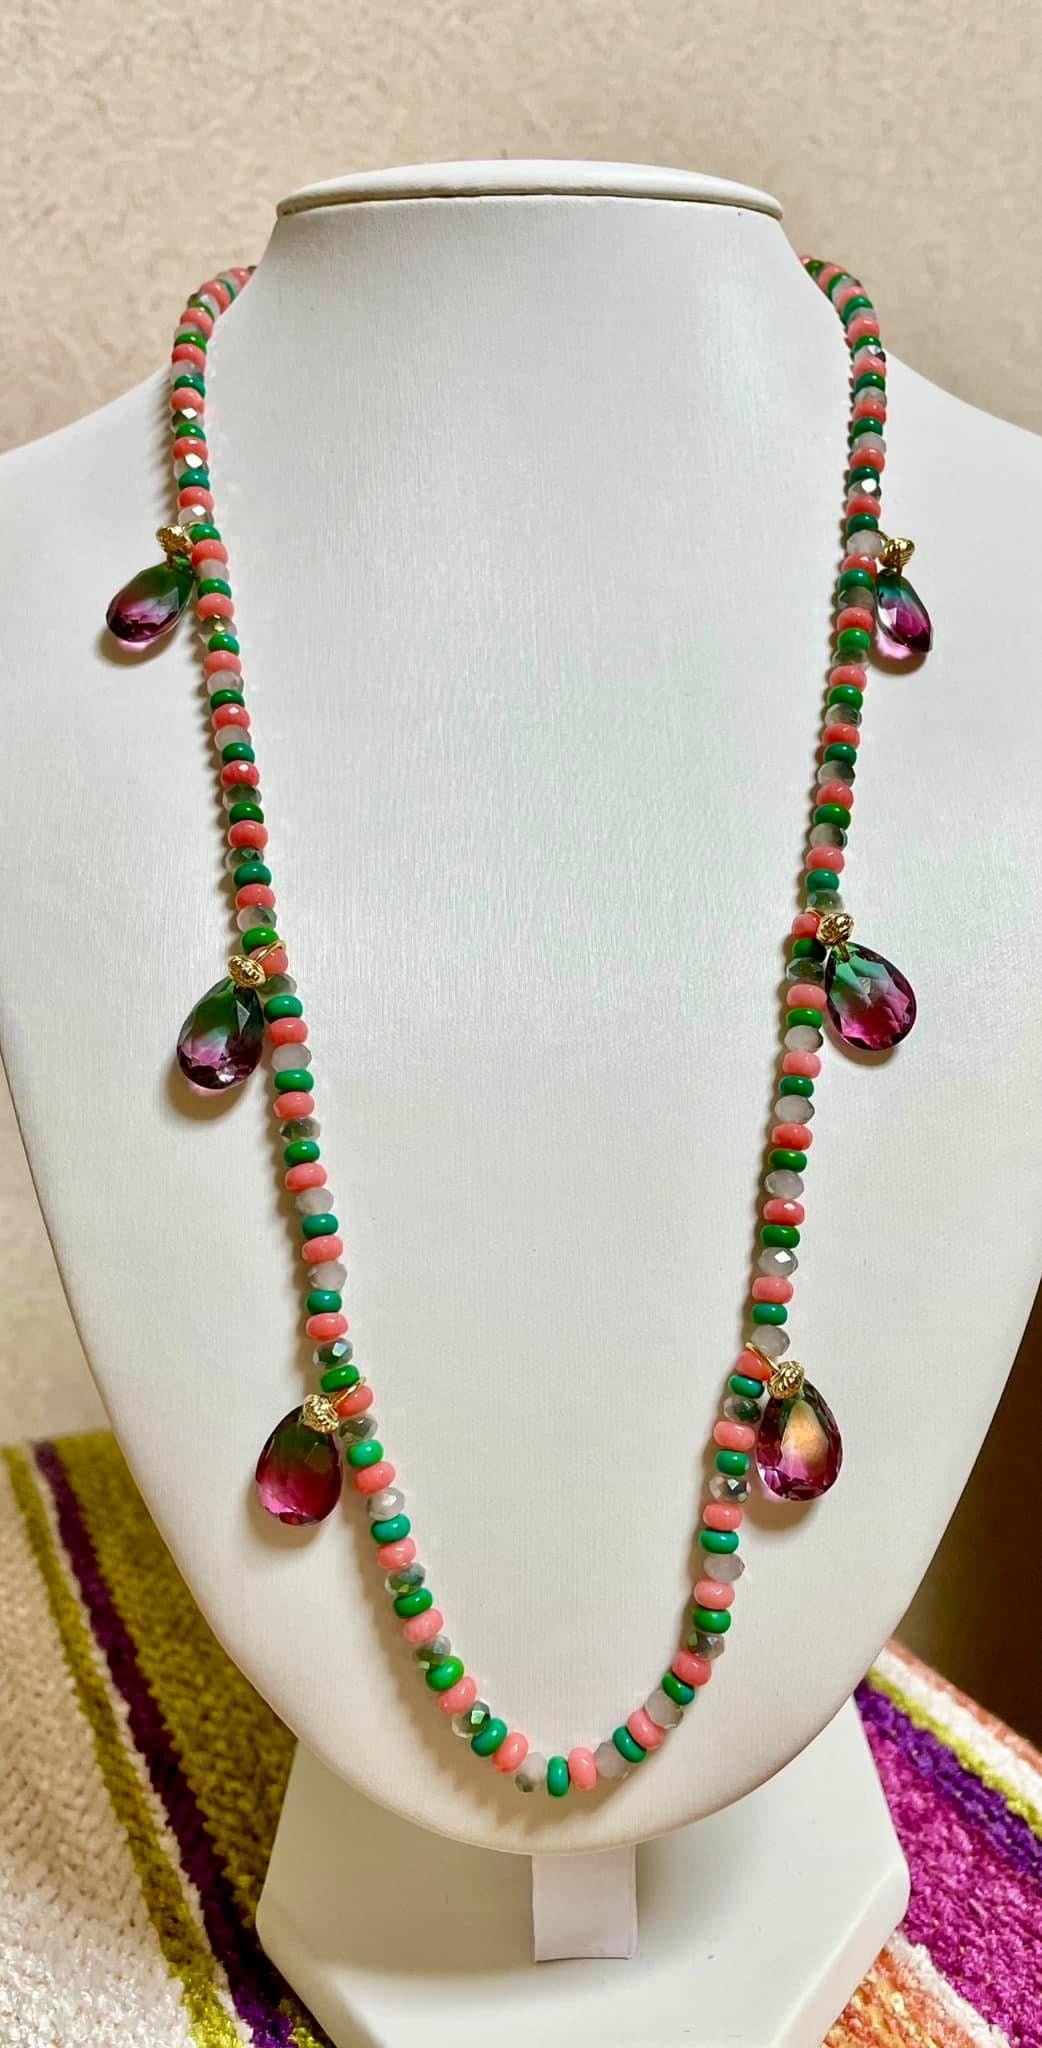 4 colored beads necklace